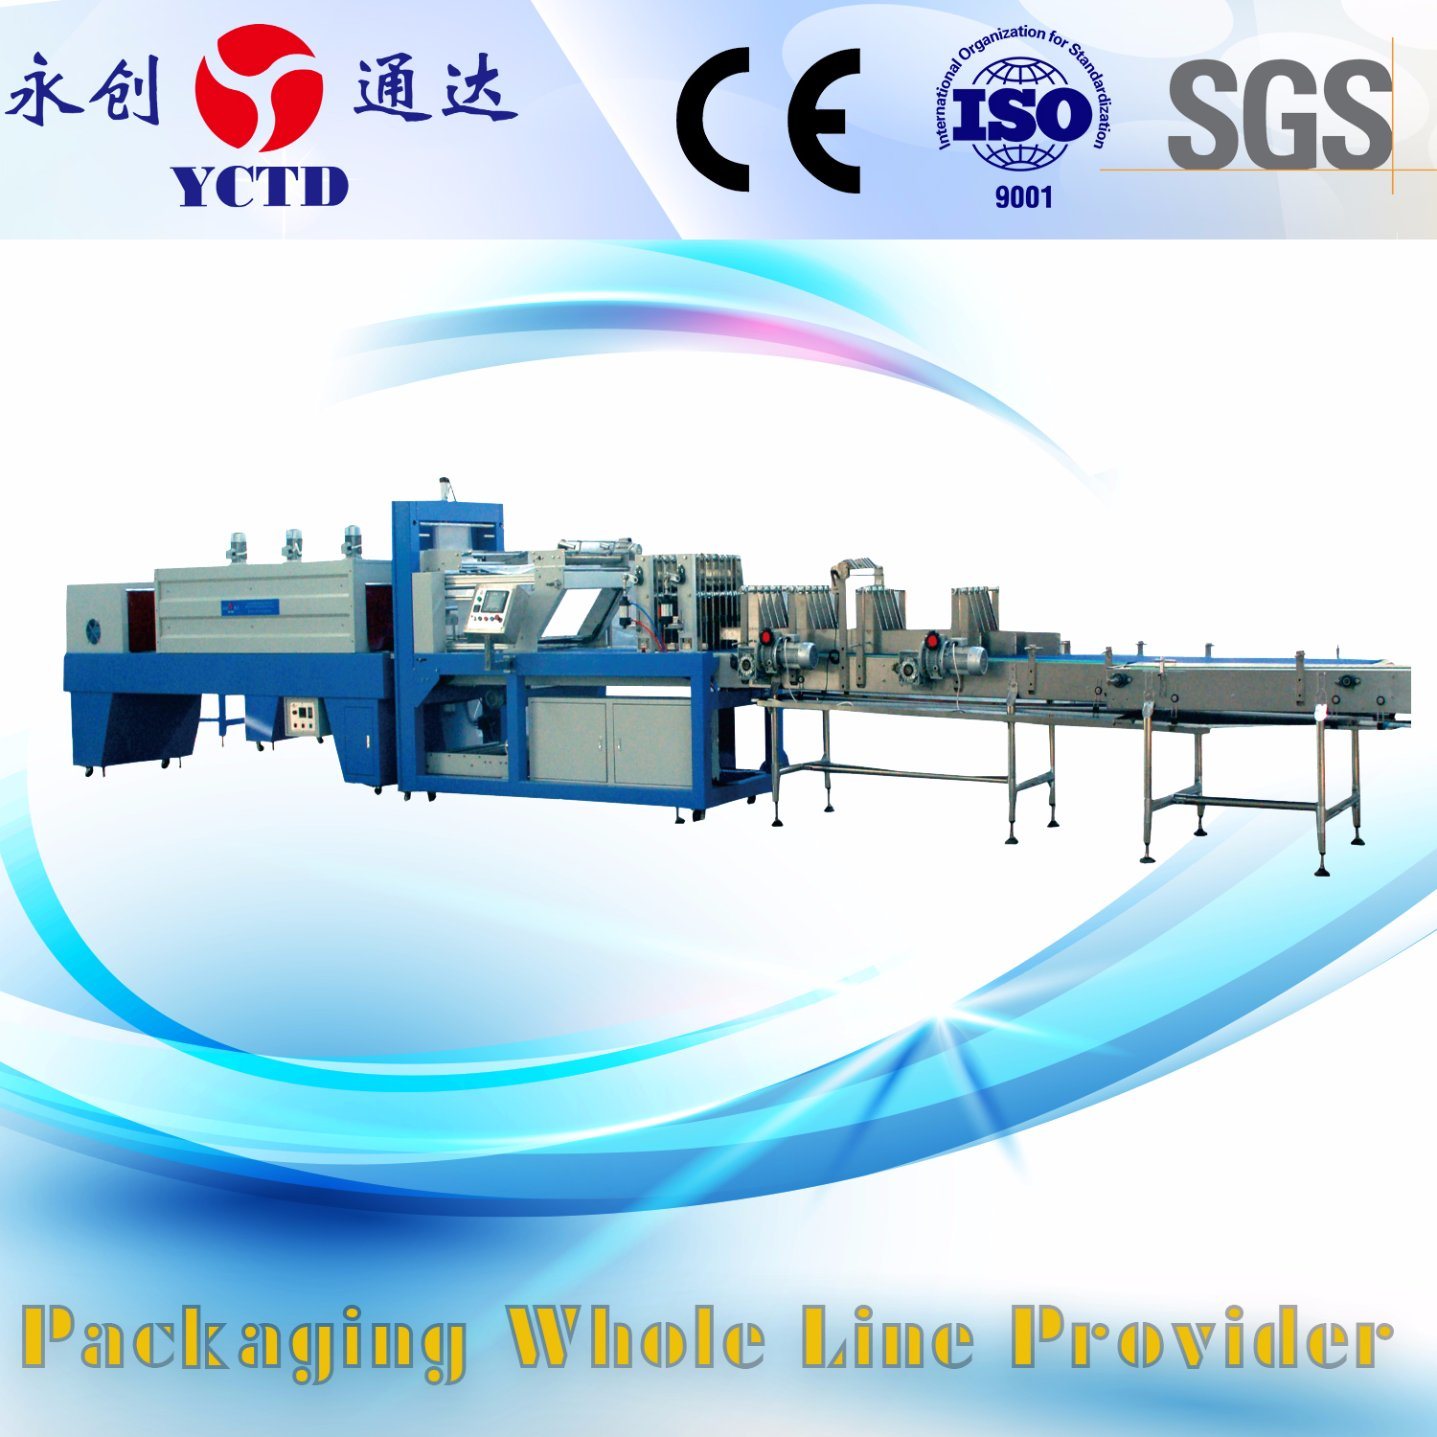 Heat Shrinkable Wrapping Machine Sale (YCTD)